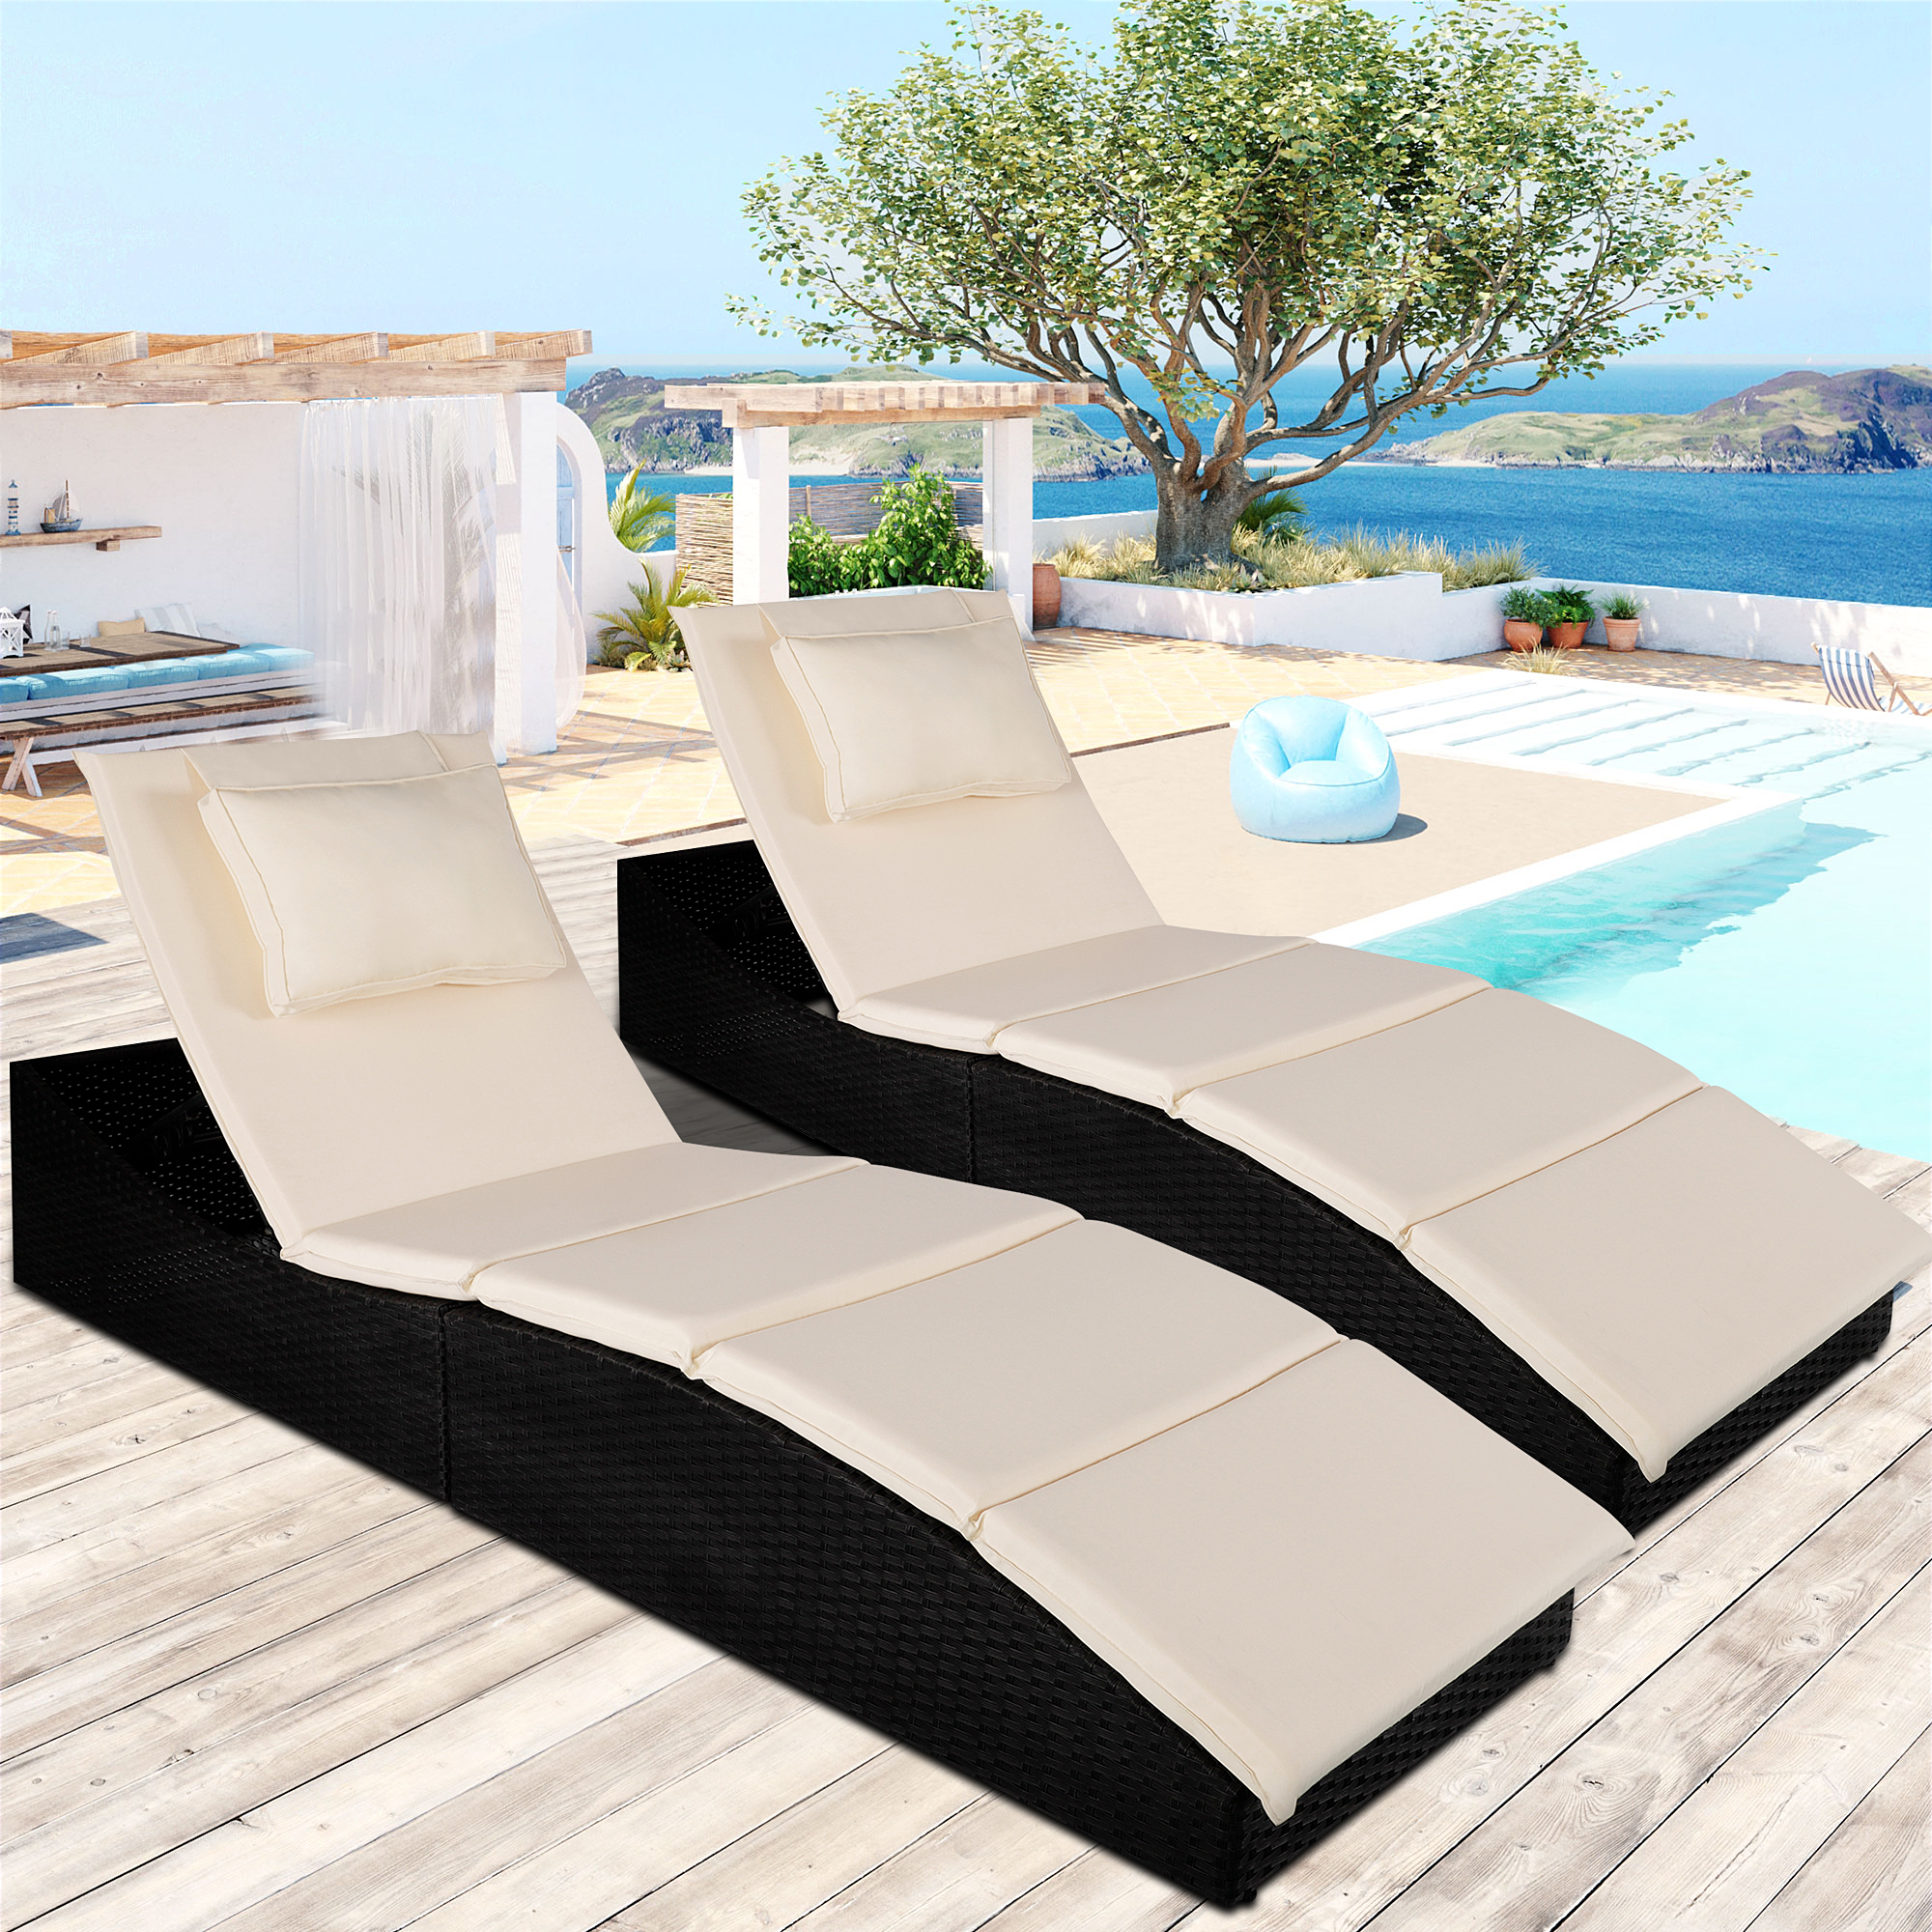 2-Piece Patio Rattan Pool Lounge Chair with Cushion, 5 Adjustable Positions Folding Patio Chaise Lounge, Outdoor Wicker Beach Reclining Chair, PE Rattan Beach Lounger Chair for Balcony Deck Patio, T25 - image 5 of 9